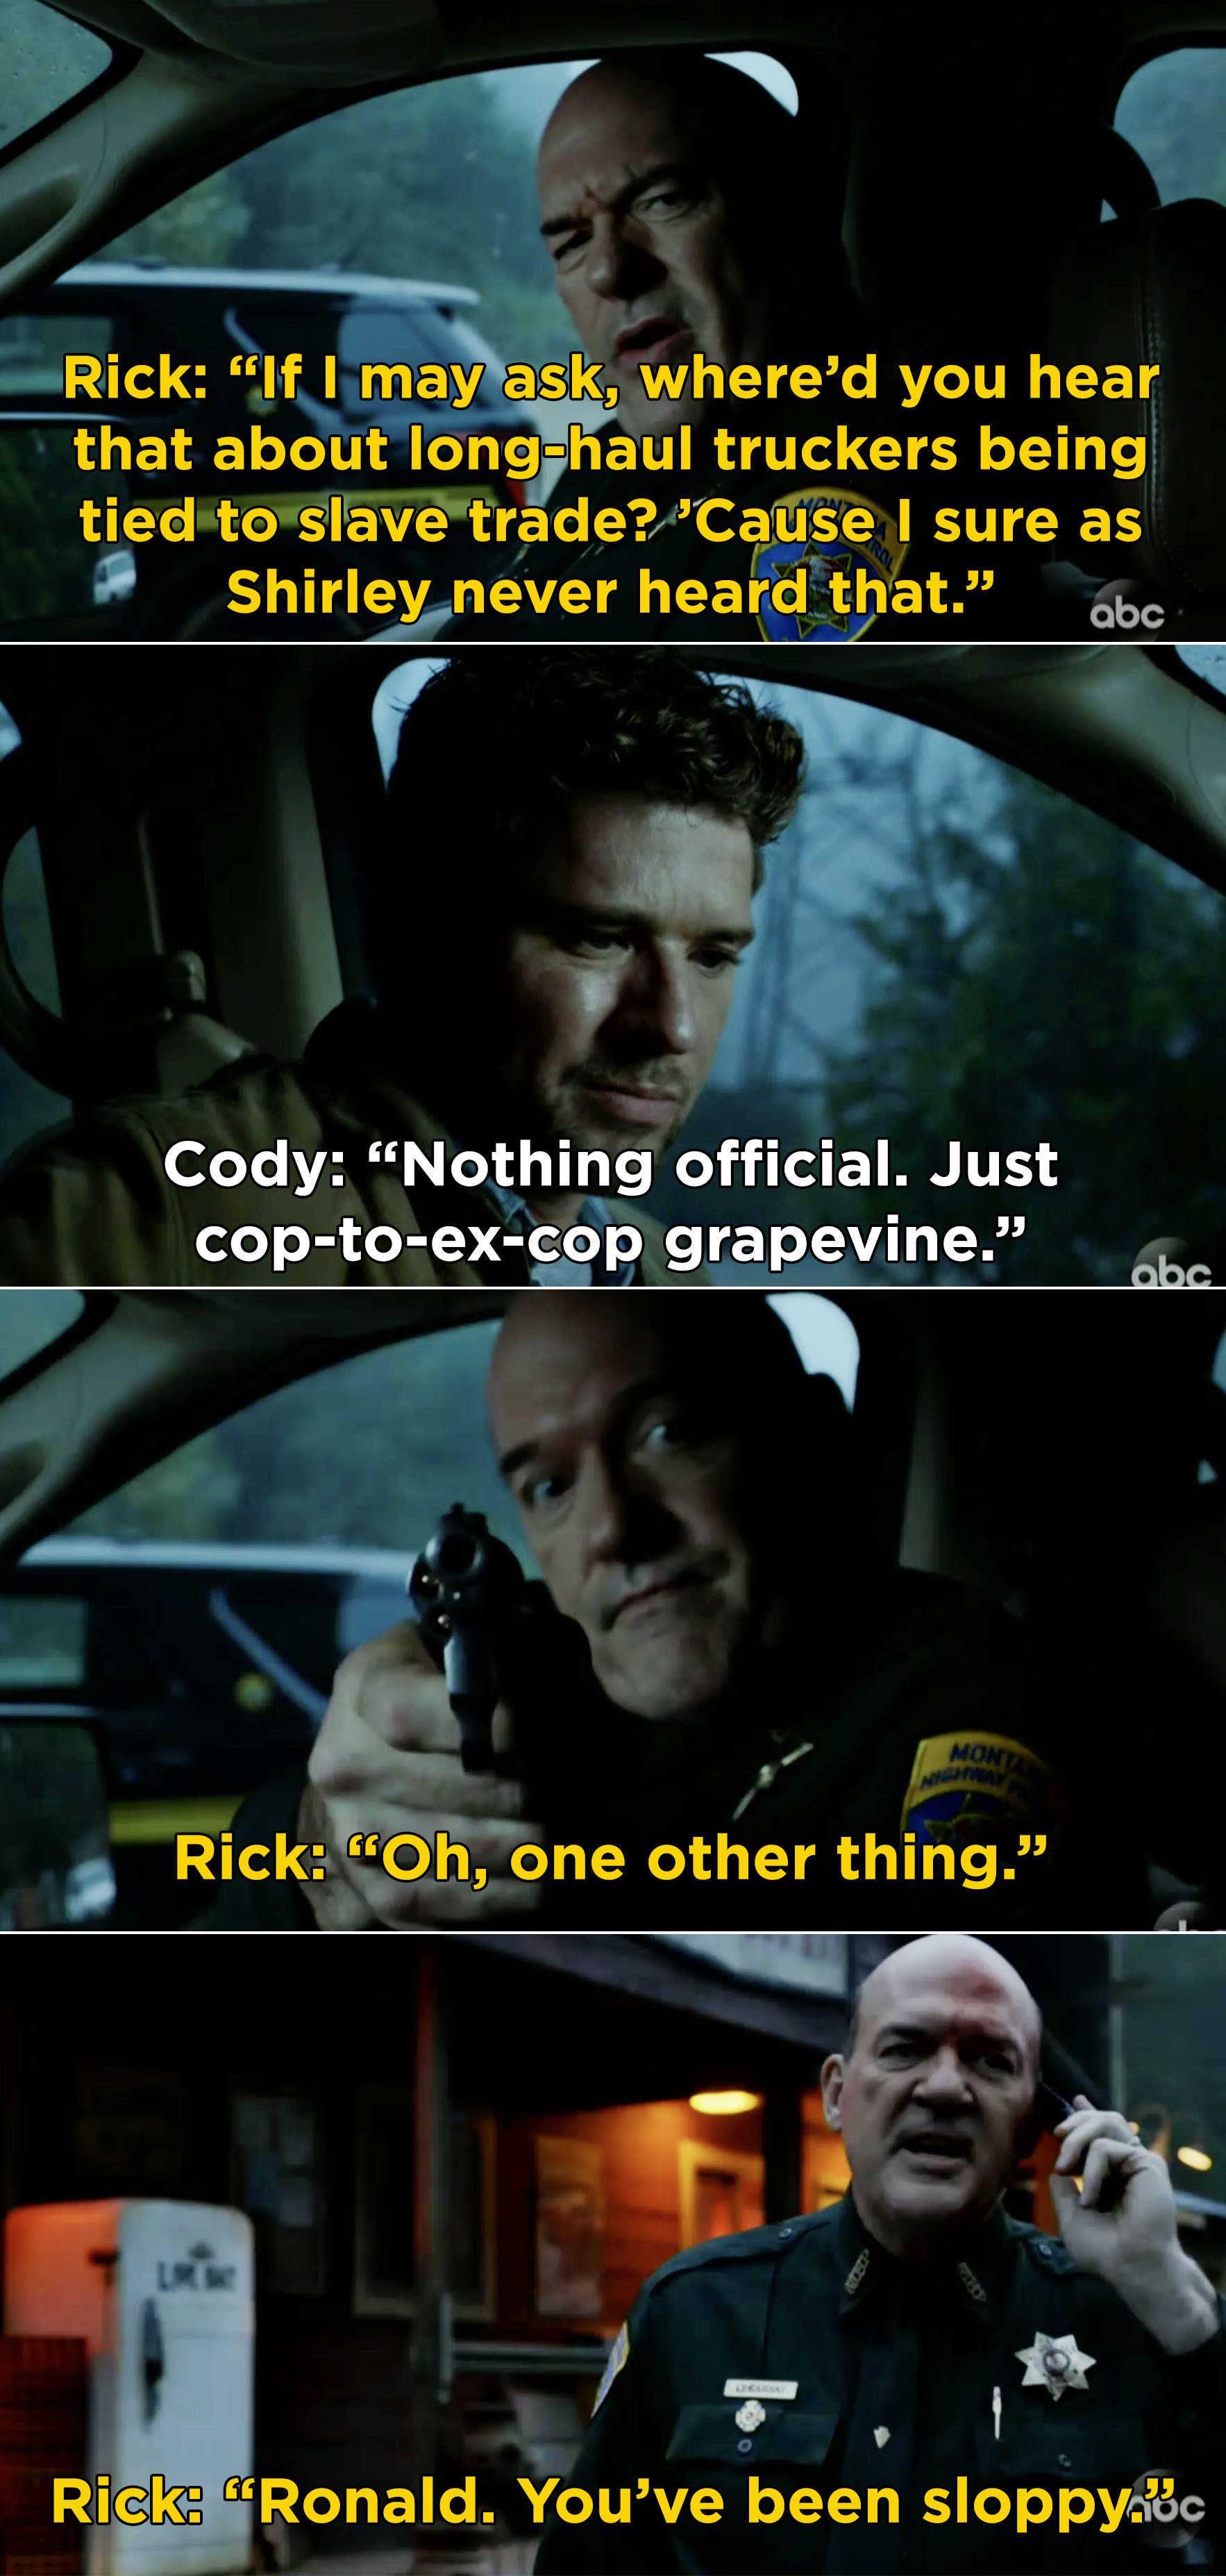 Rick asking Cody how he heard about the long-haul truckers being tied to slave trade before killing him